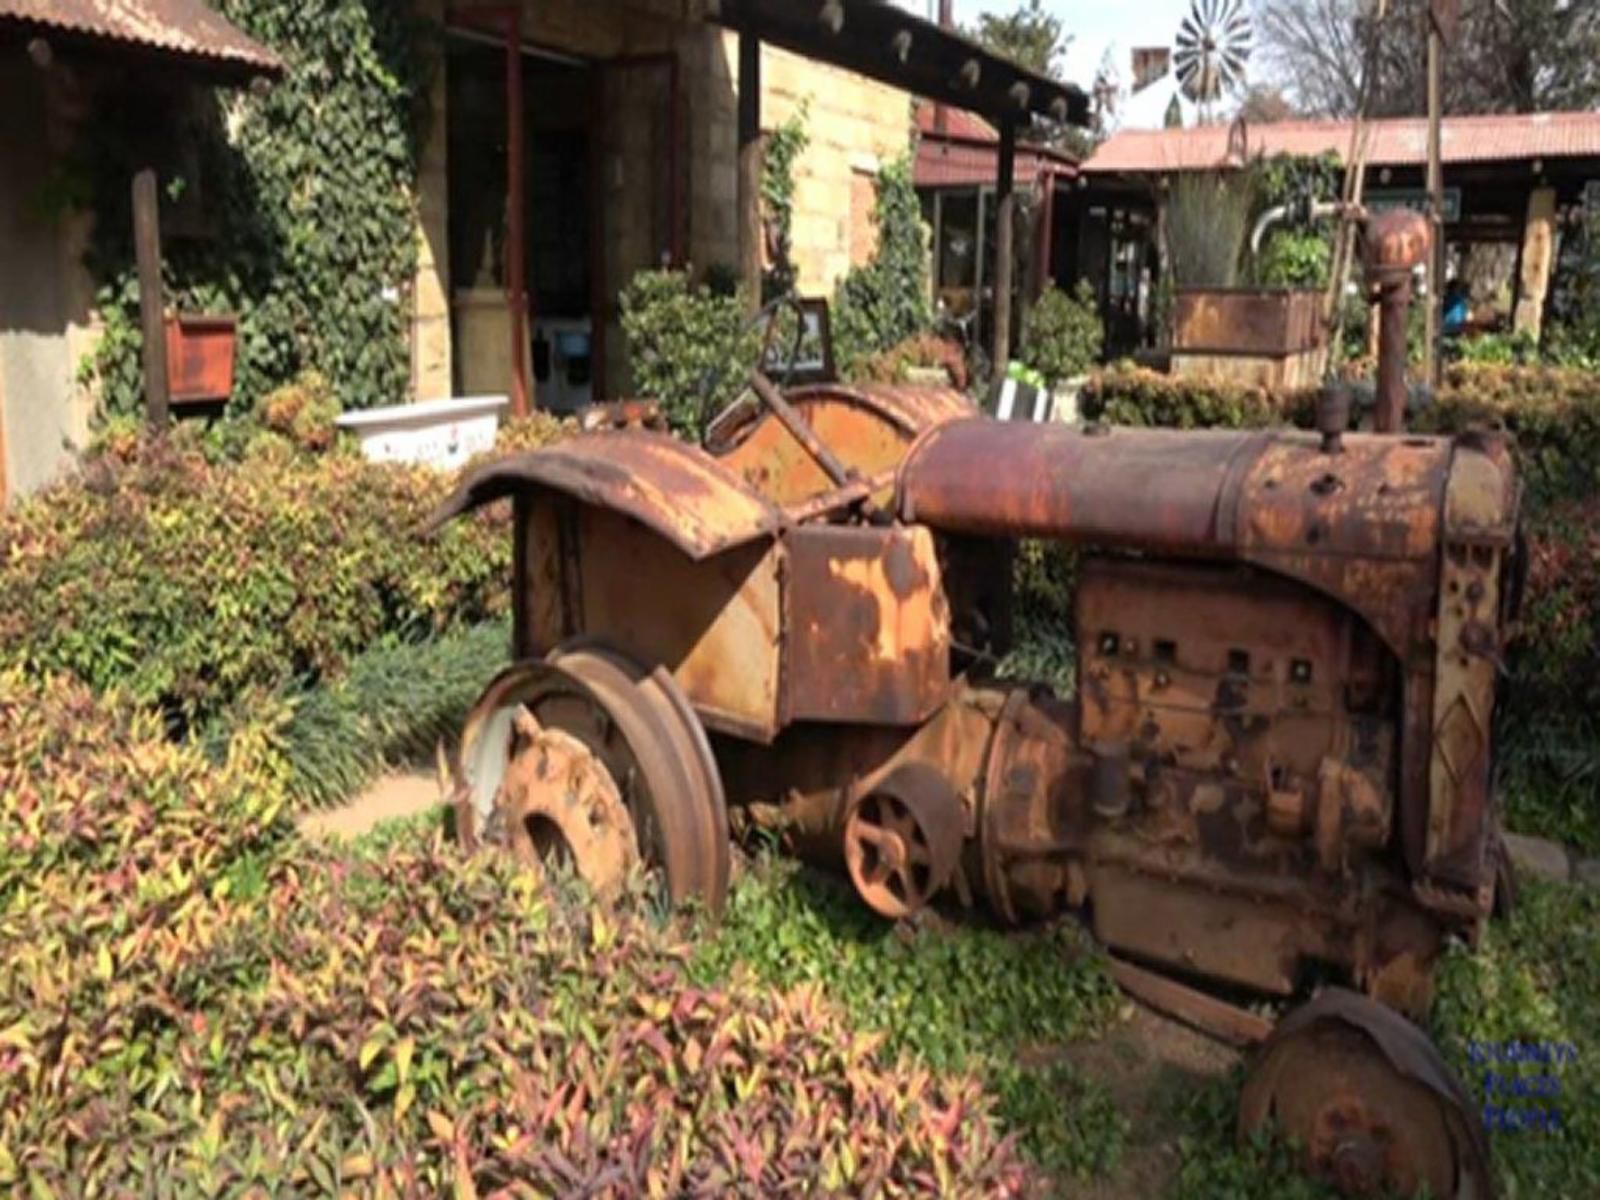 The Stoke House Clarens Free State South Africa Tractor, Vehicle, Agriculture